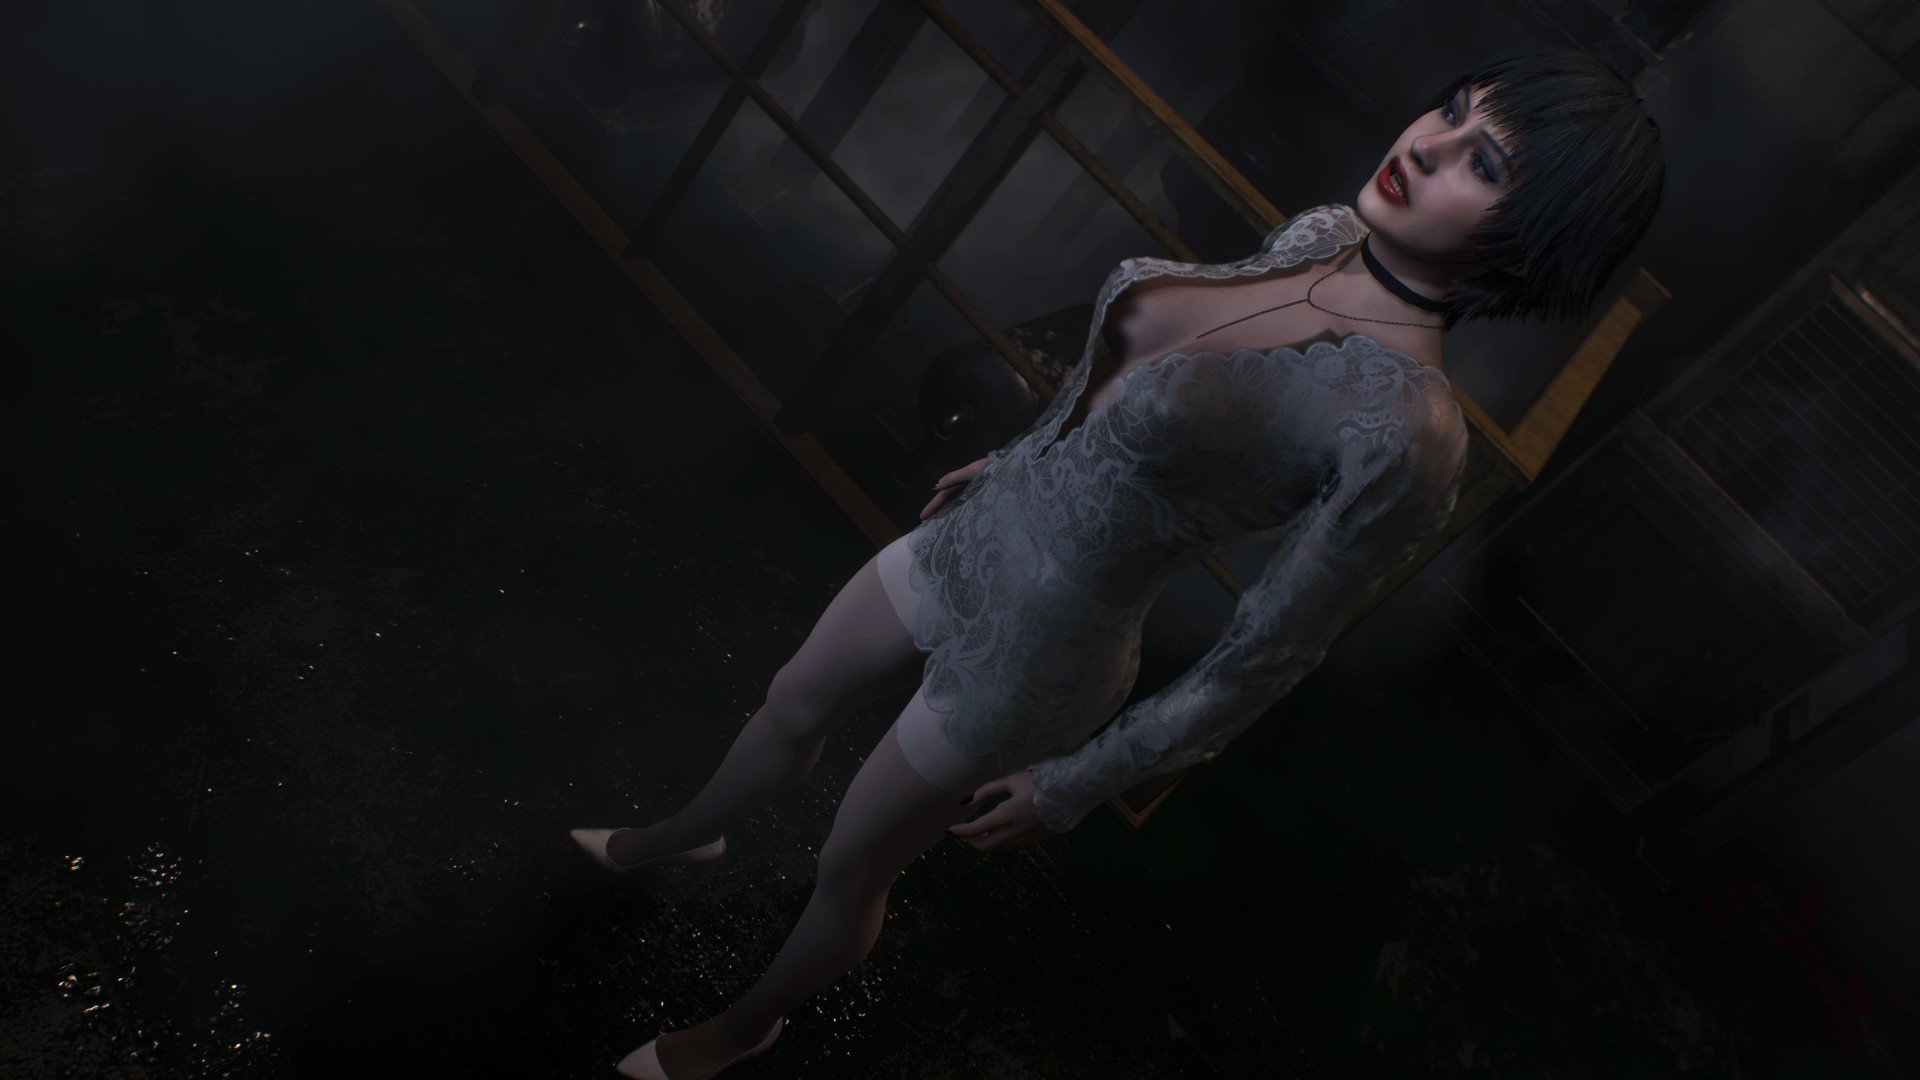 Resident Evil 2 Remake - Ada Wong Nude Mod is now available for